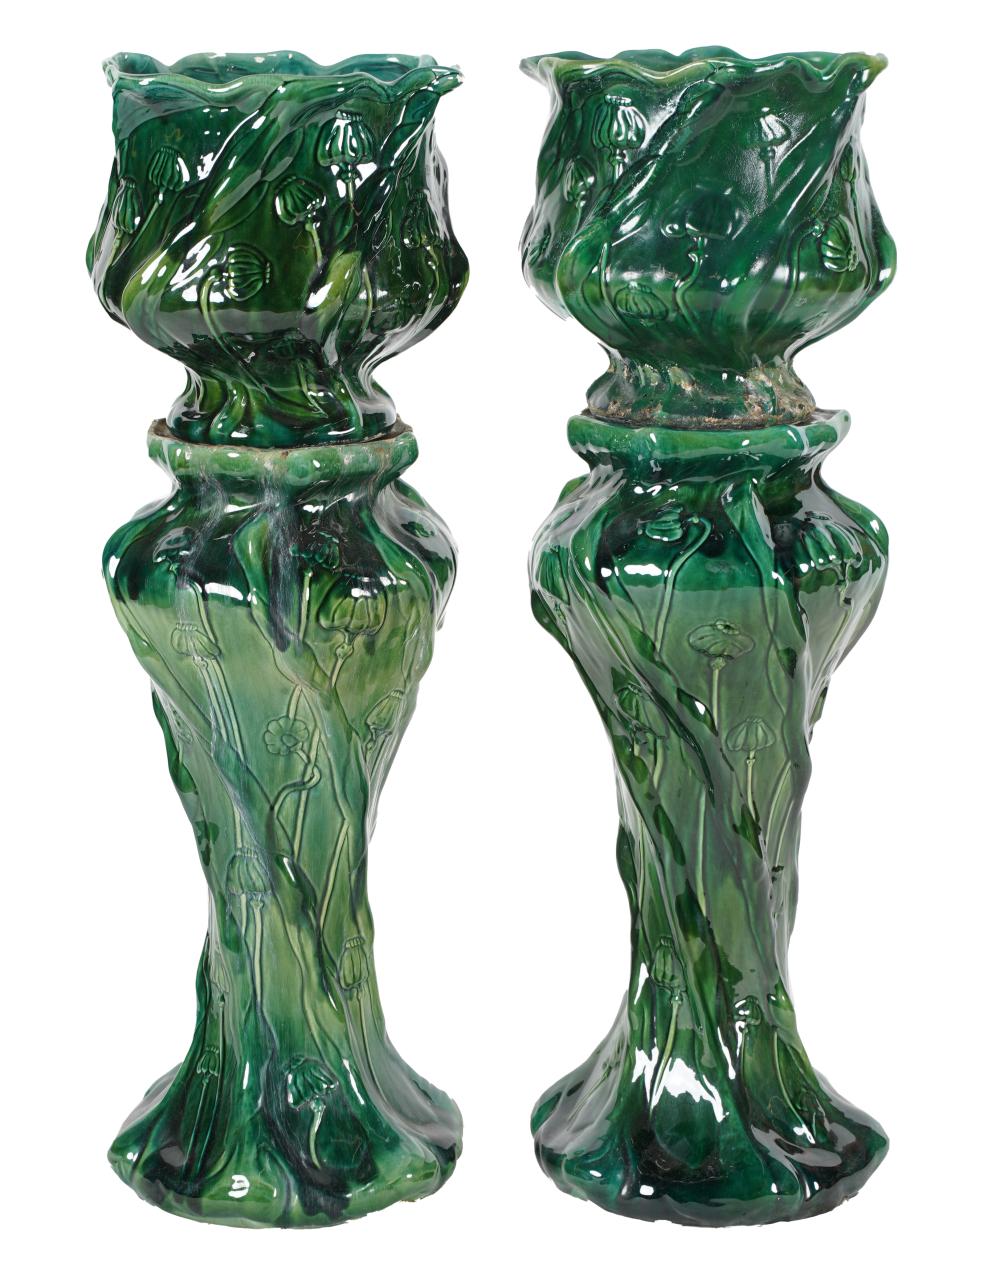 PAIR OF GREEN GLAZED MAJOLICA URNS 324d4a